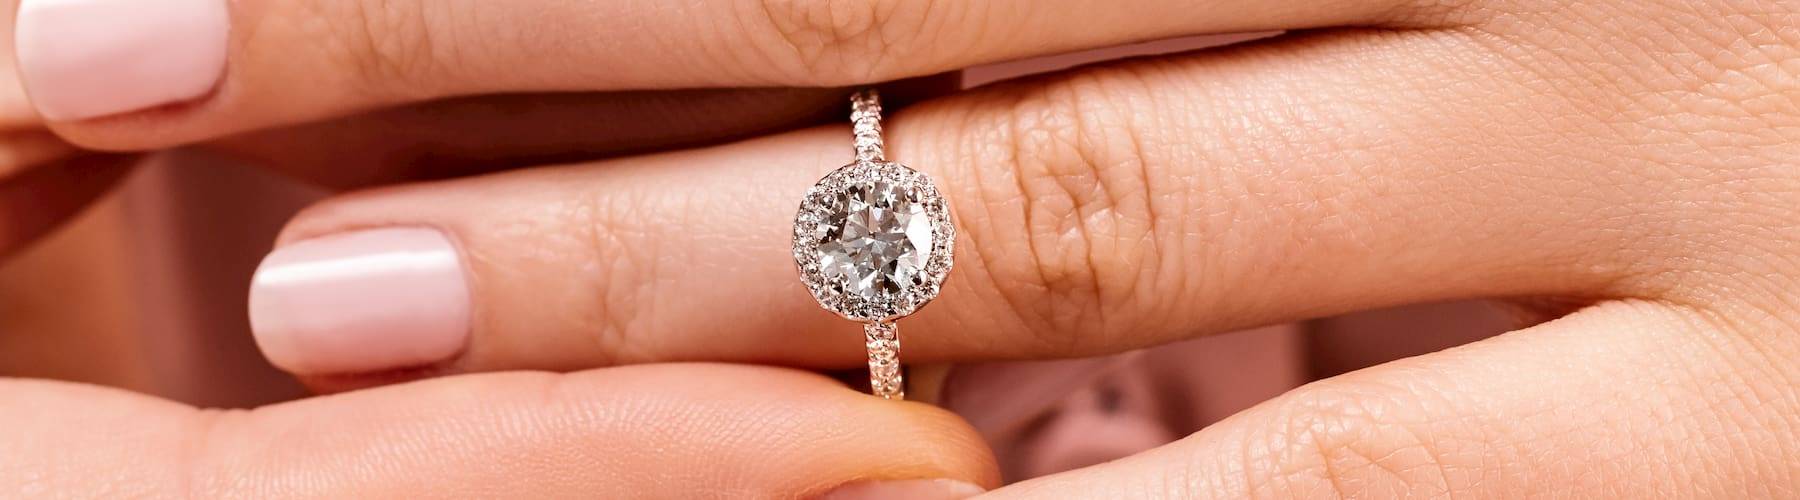 Top 10 Halo Engagement Rings in 2021